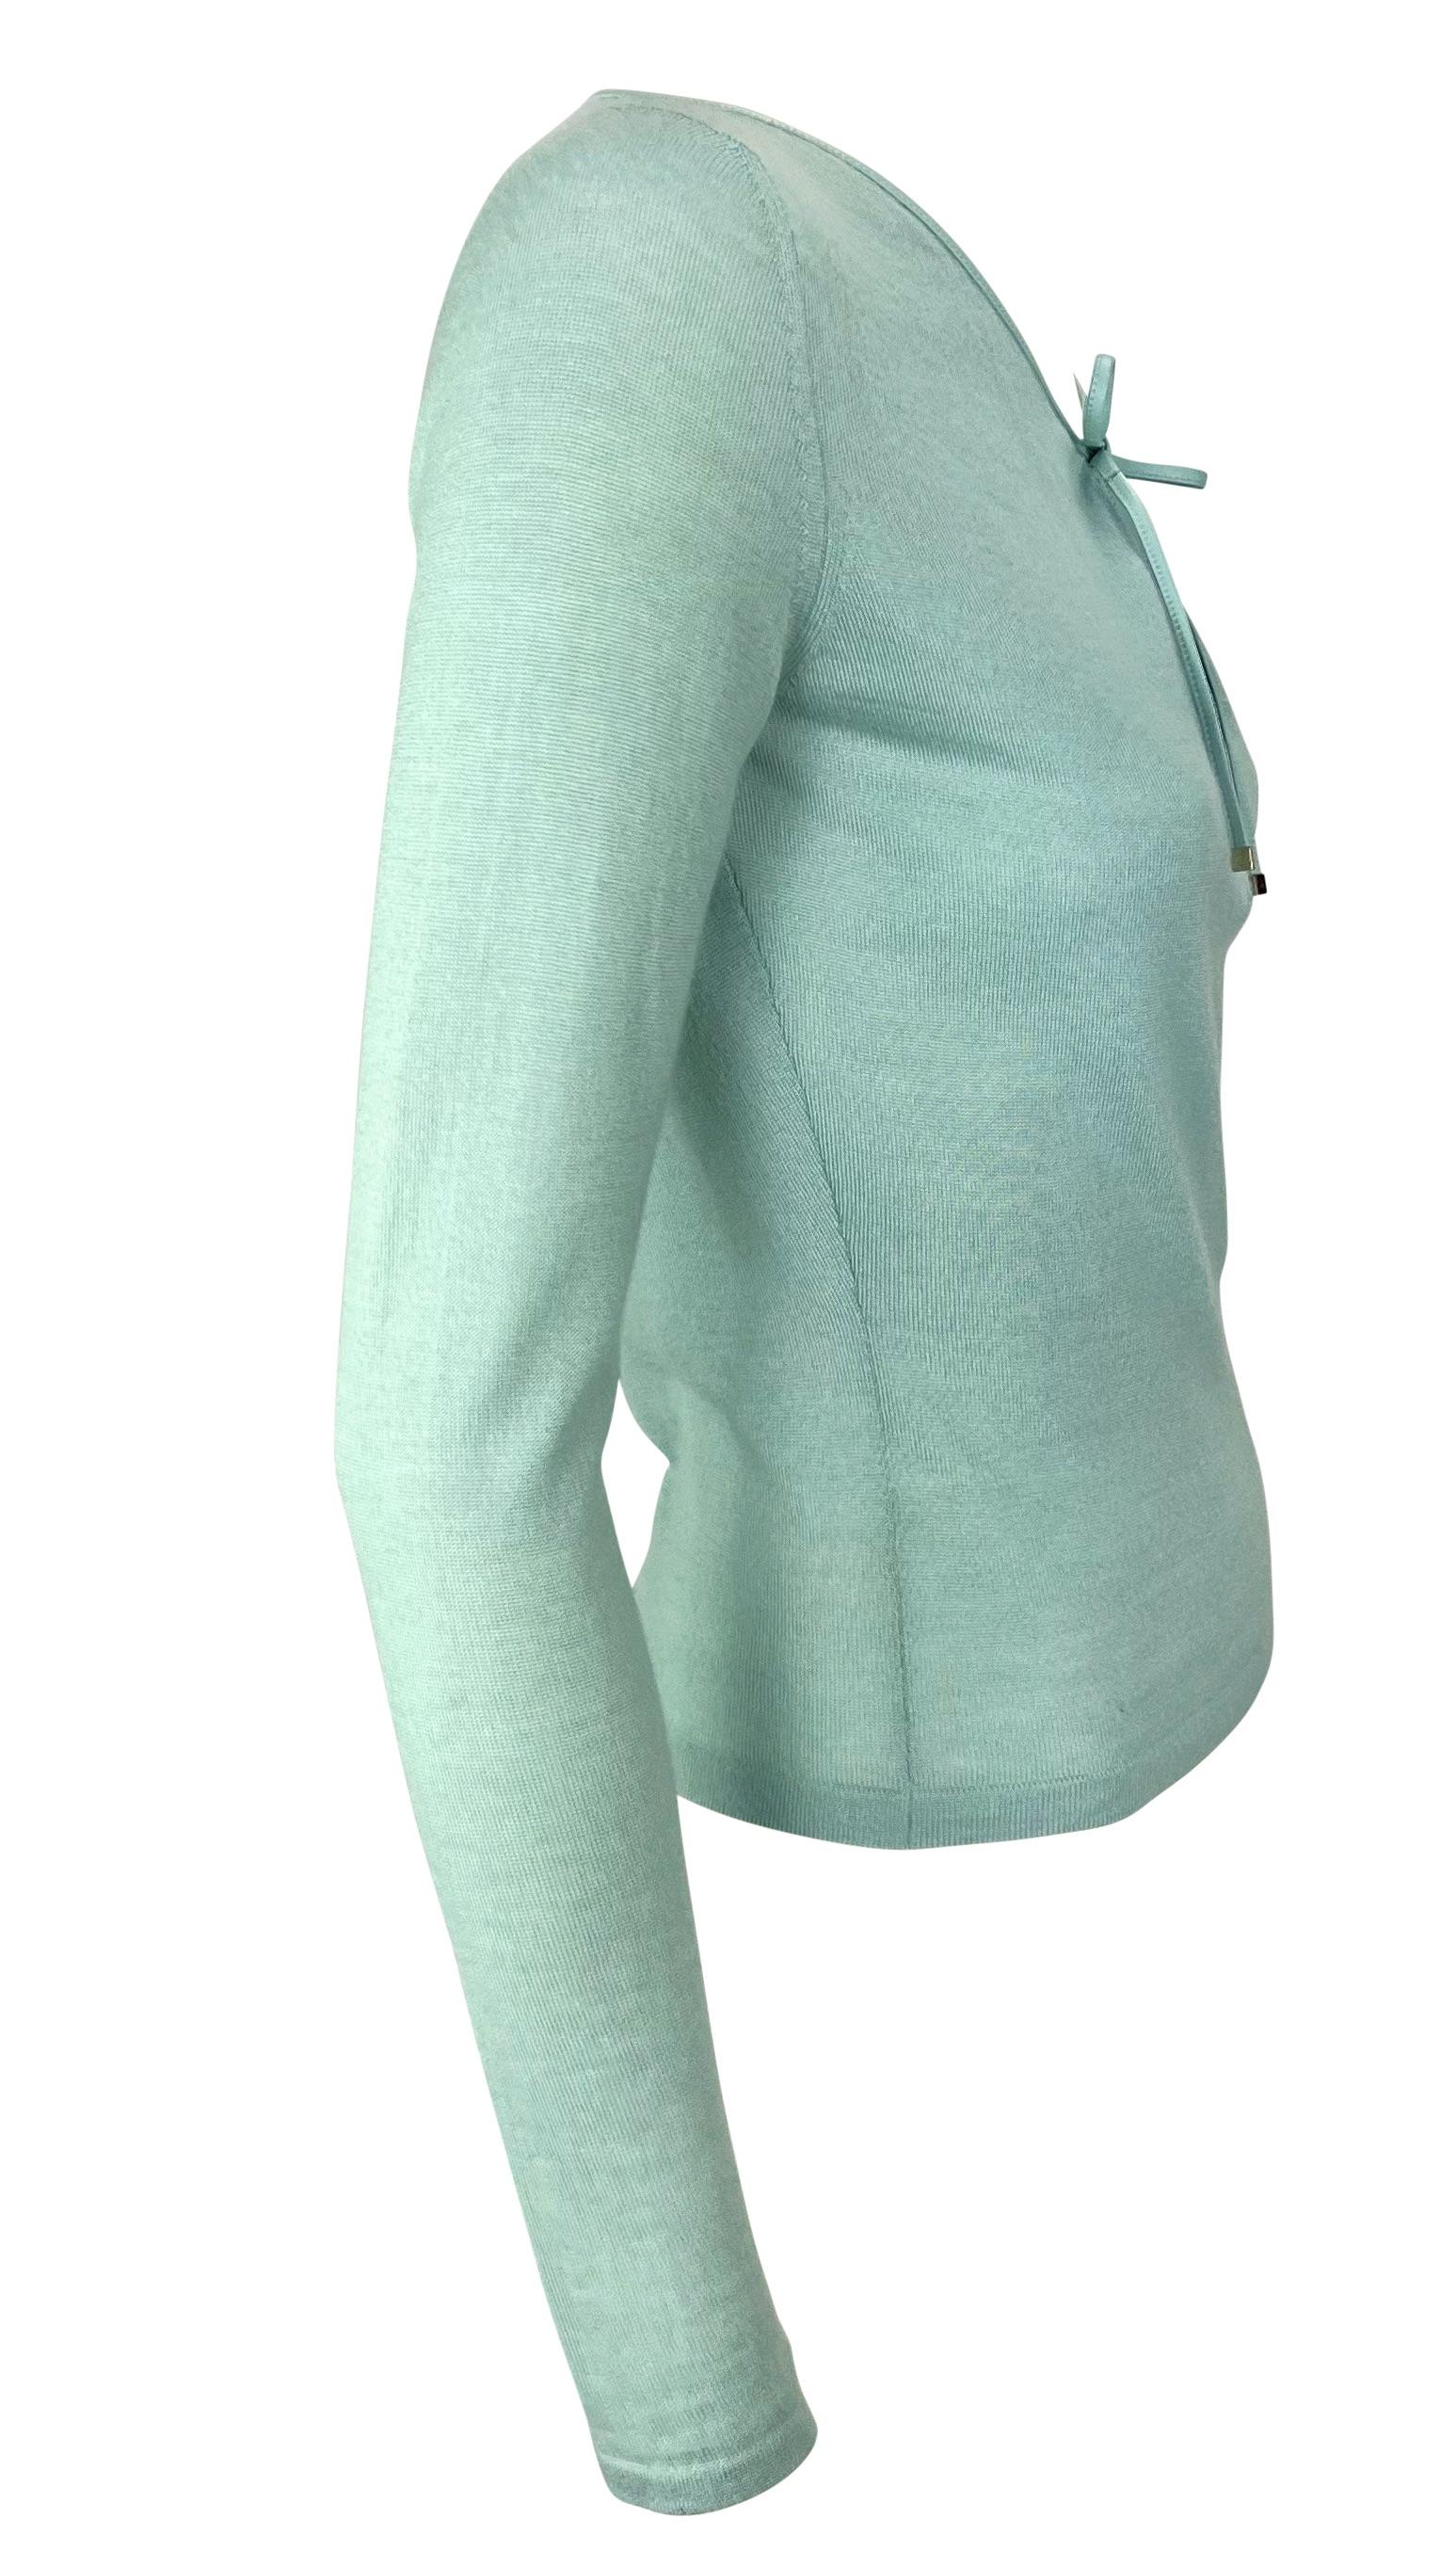 S/S 2000 Gucci by Tom Ford Baby Blue Knit Leather Tie Plunging Top For Sale 1